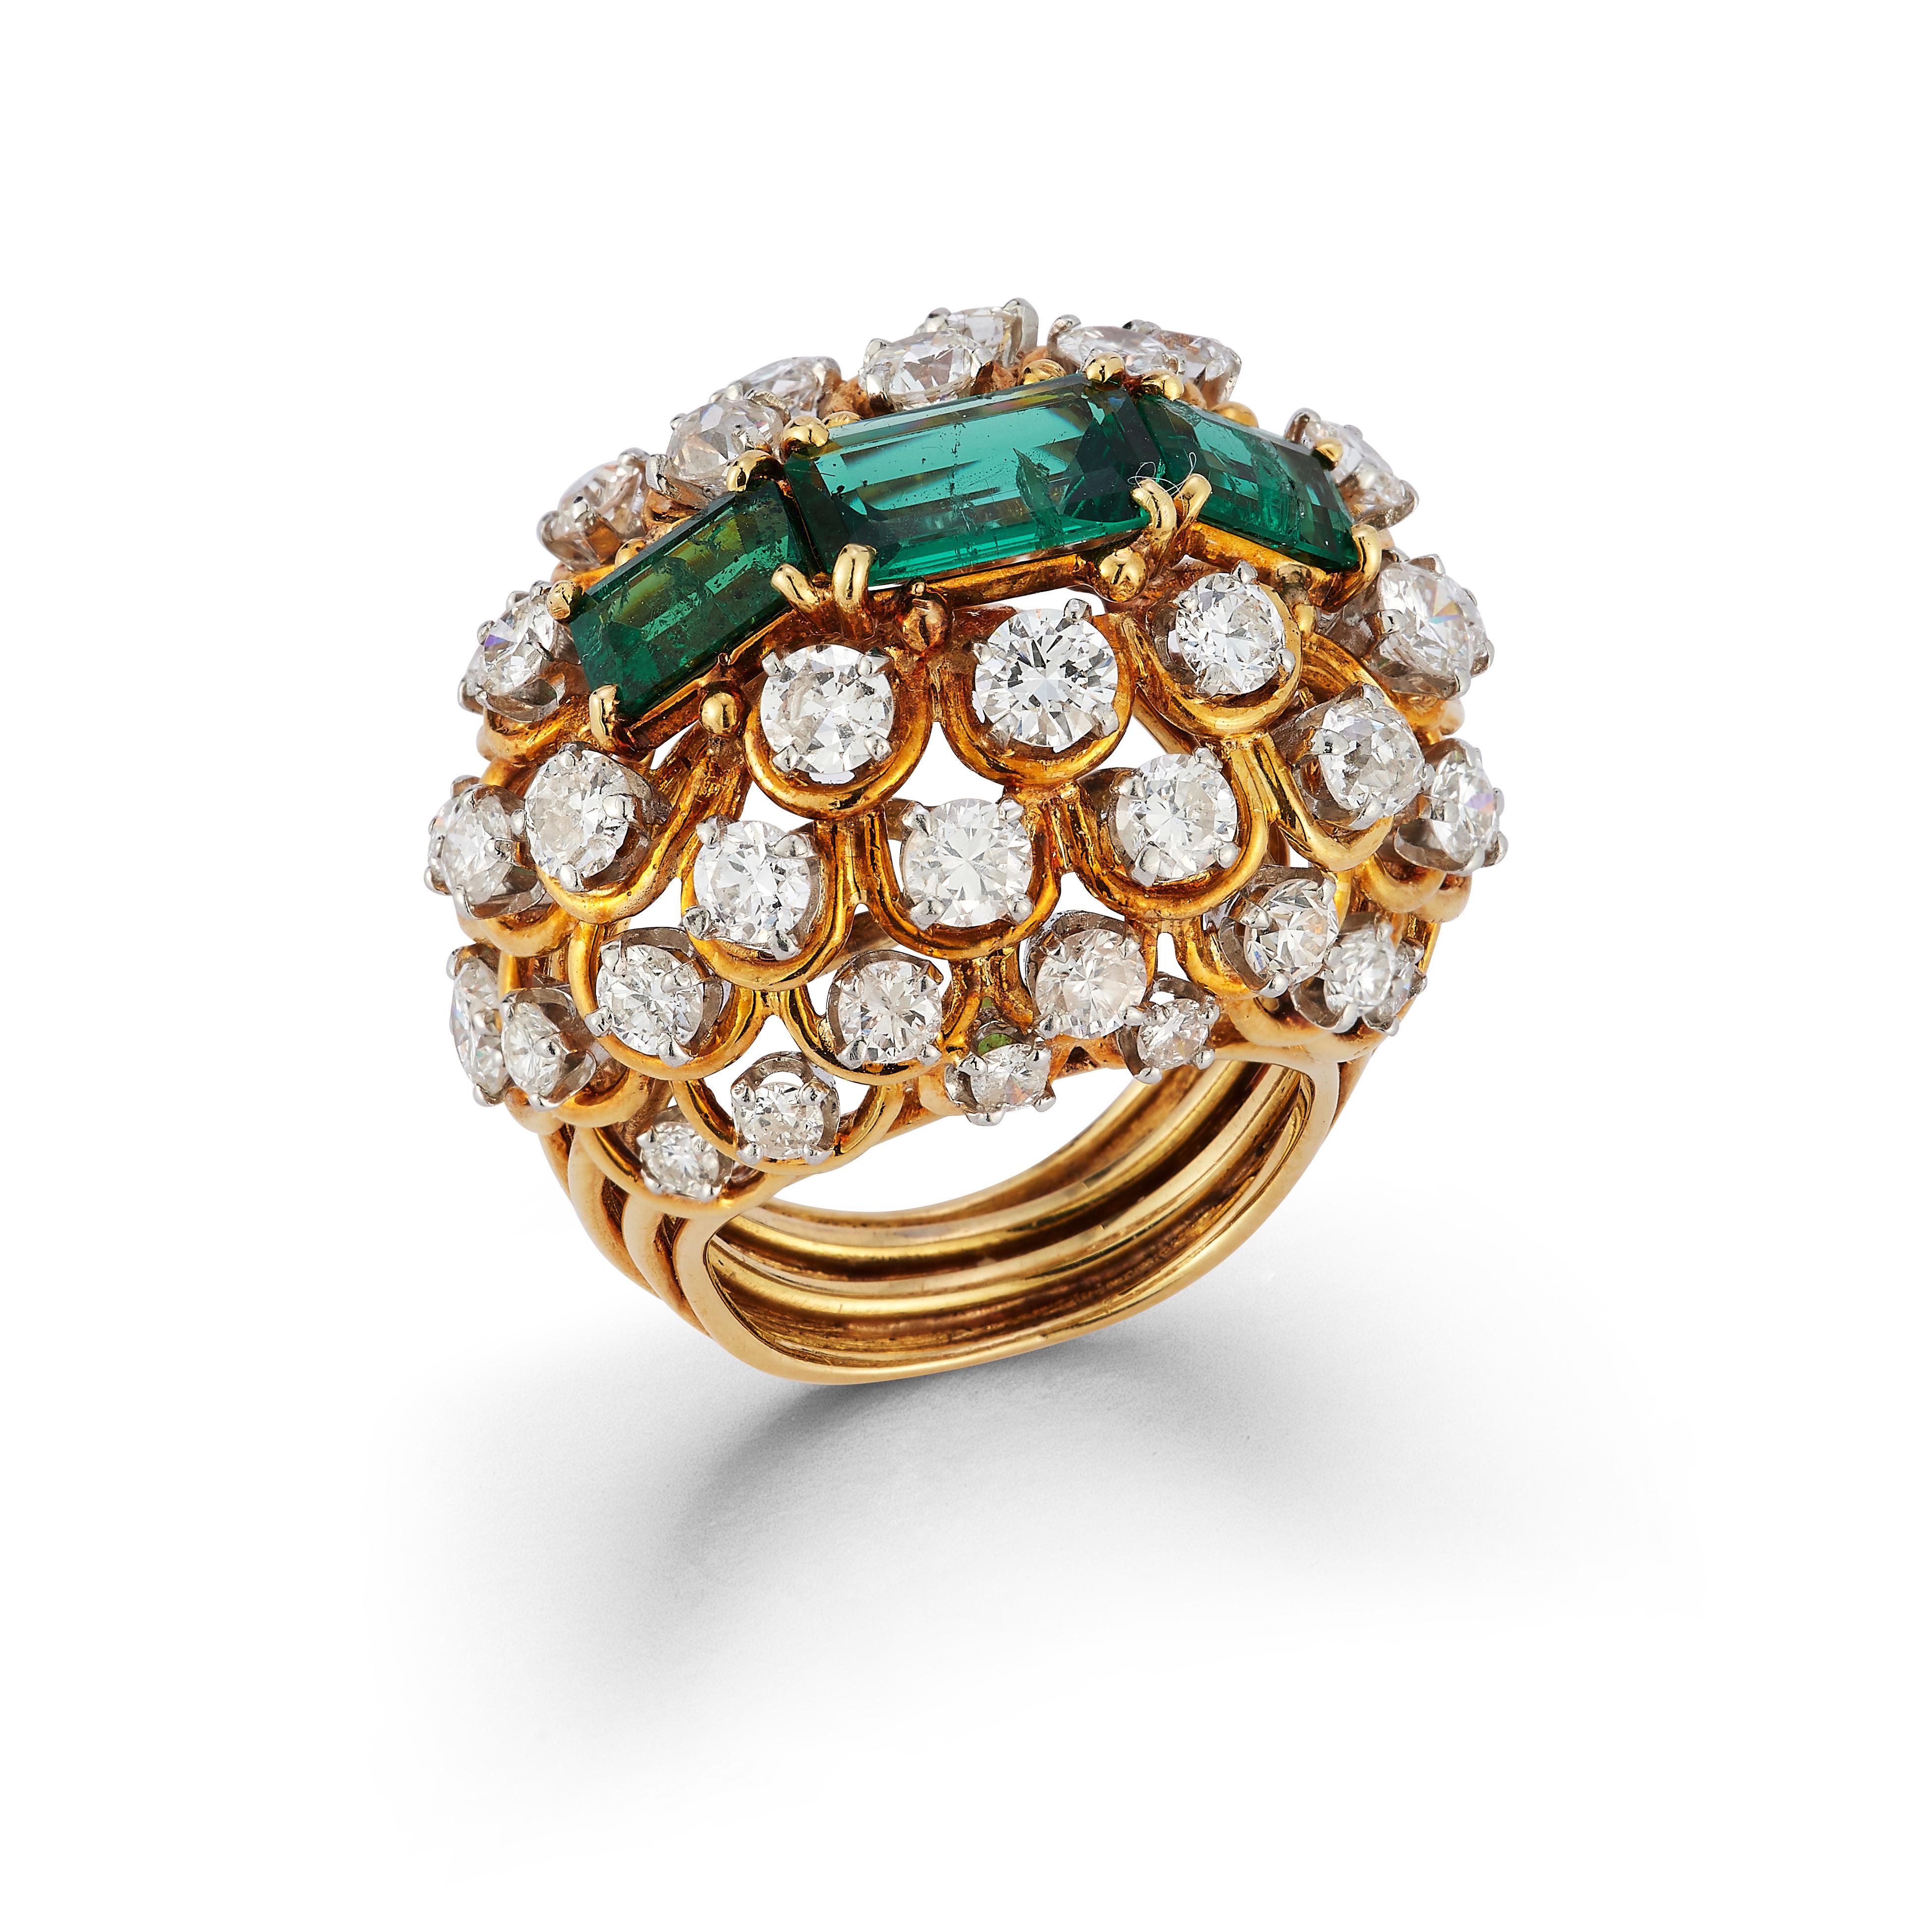 David Webb Emerald & Diamond Ring

An 18 karat gold and platinum ring set with 3 baguette cut emeralds in a cluster of round cut diamonds 

Signed David Webb & numbered
Stamped 18k & platinum

Ring Size: 5.25
Resizable free of charge

Accompanied